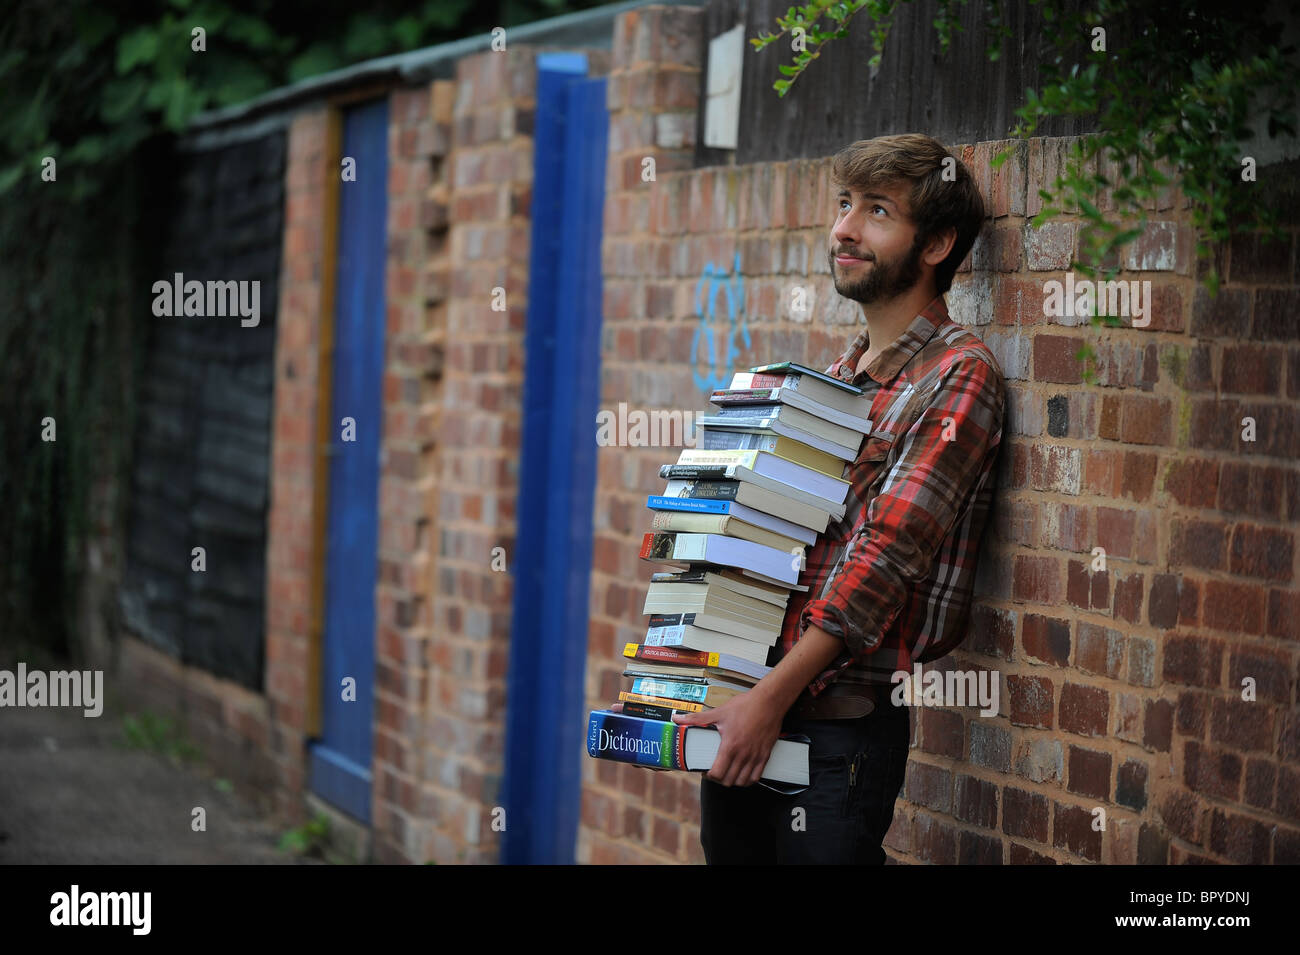 A student standing with a large pile of books, illustrating studying, revision, cramming and revising Stock Photo